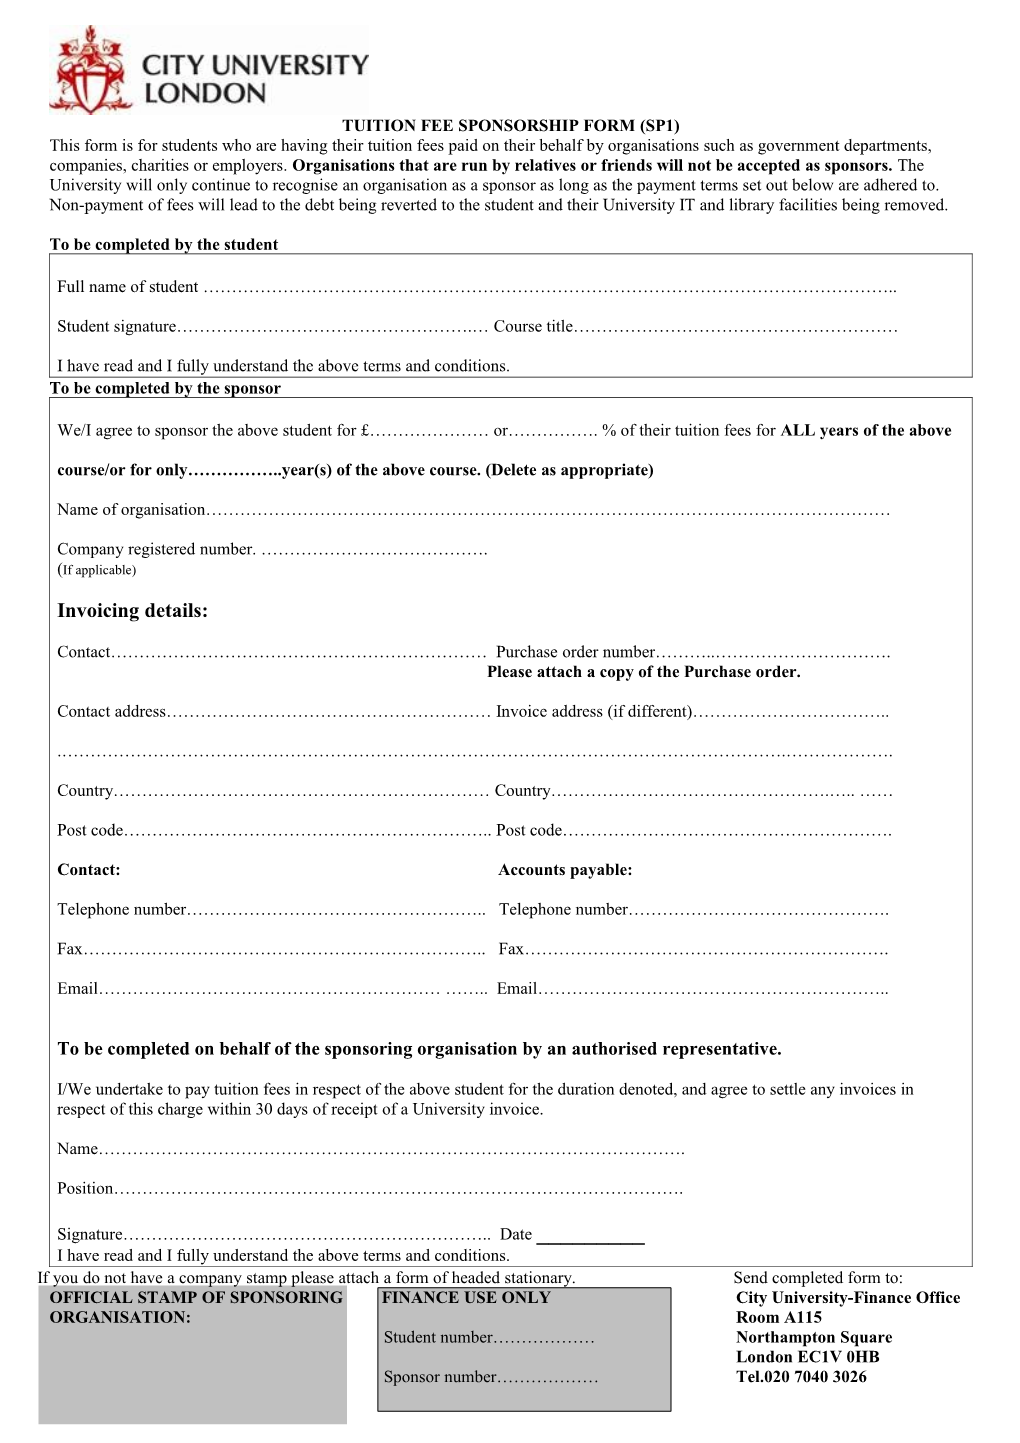 Tuition Fee Sponsorship Form (Sp1)